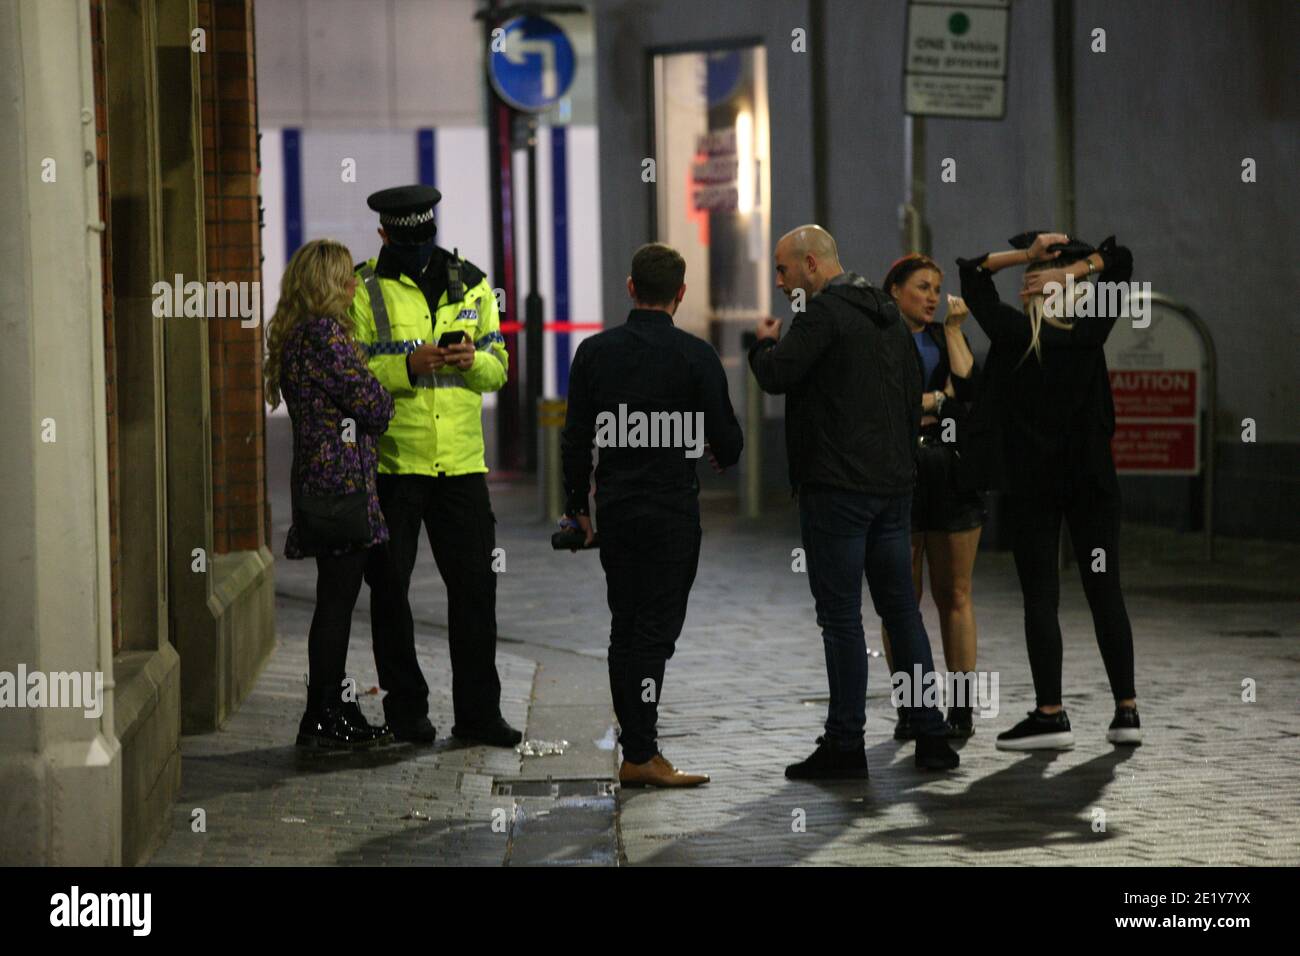 Liverpool, UK - October 10 2020: Police talk to people in Liverpool on the last weekend before stricter lockdown measures are expected across the north. Stock Photo